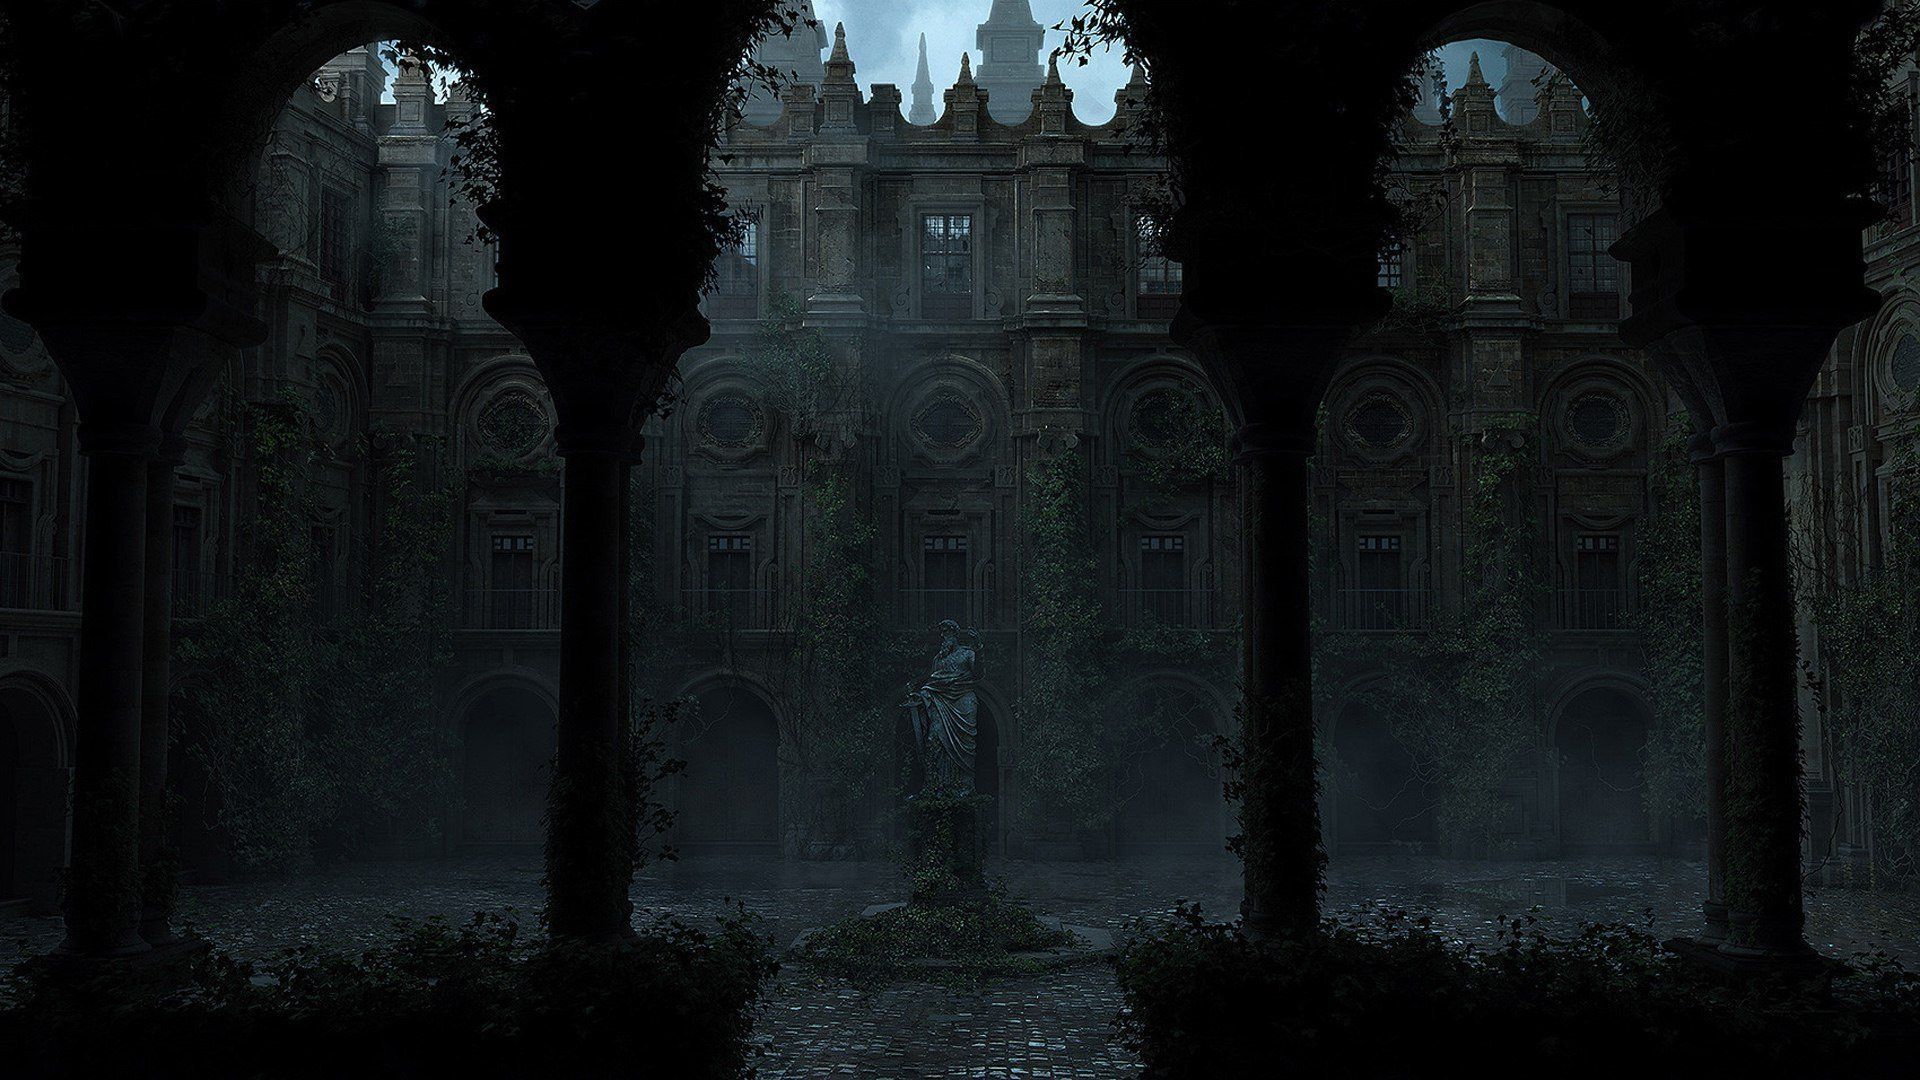 An image of a gothic style building with a courtyard in the middle - Dark, 1920x1080, statue